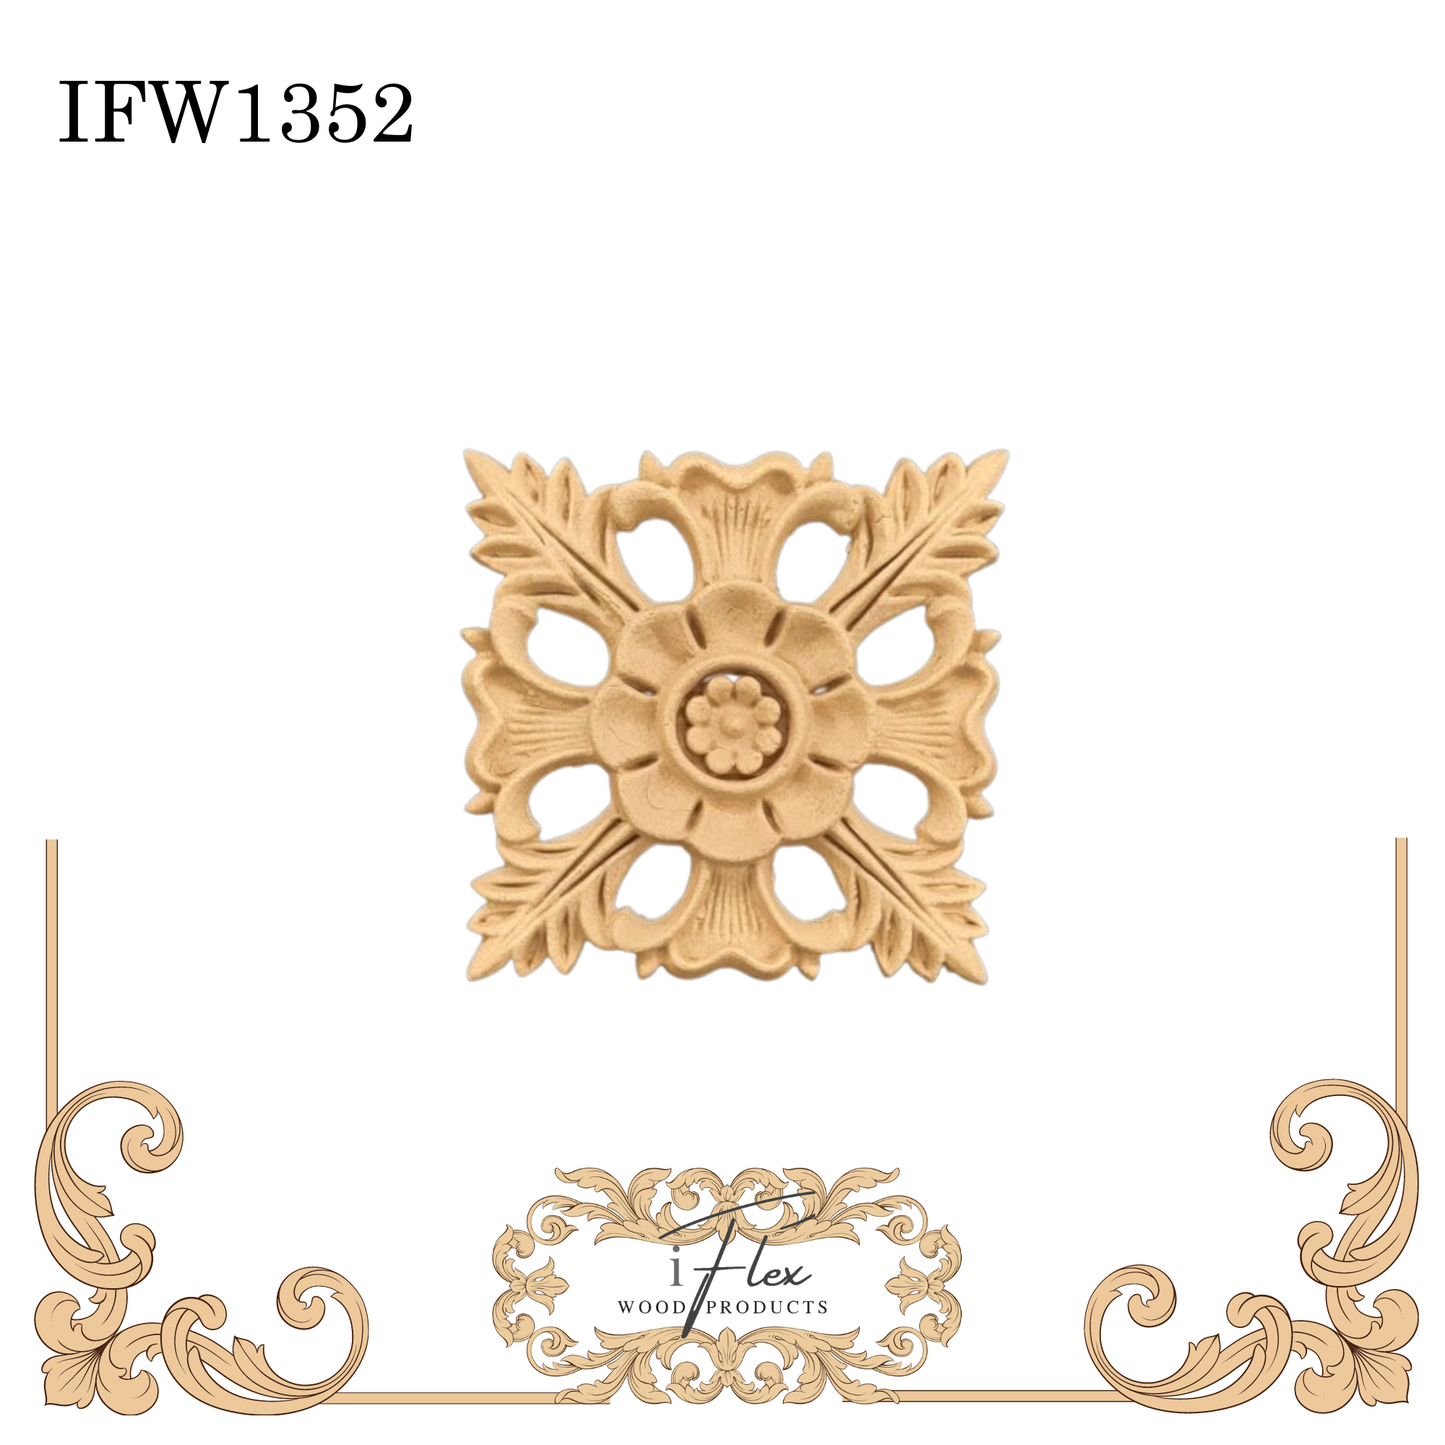 IFW 1352 iFlex Wood Products, bendable mouldings, flexible, wooden appliques, square centerpiece